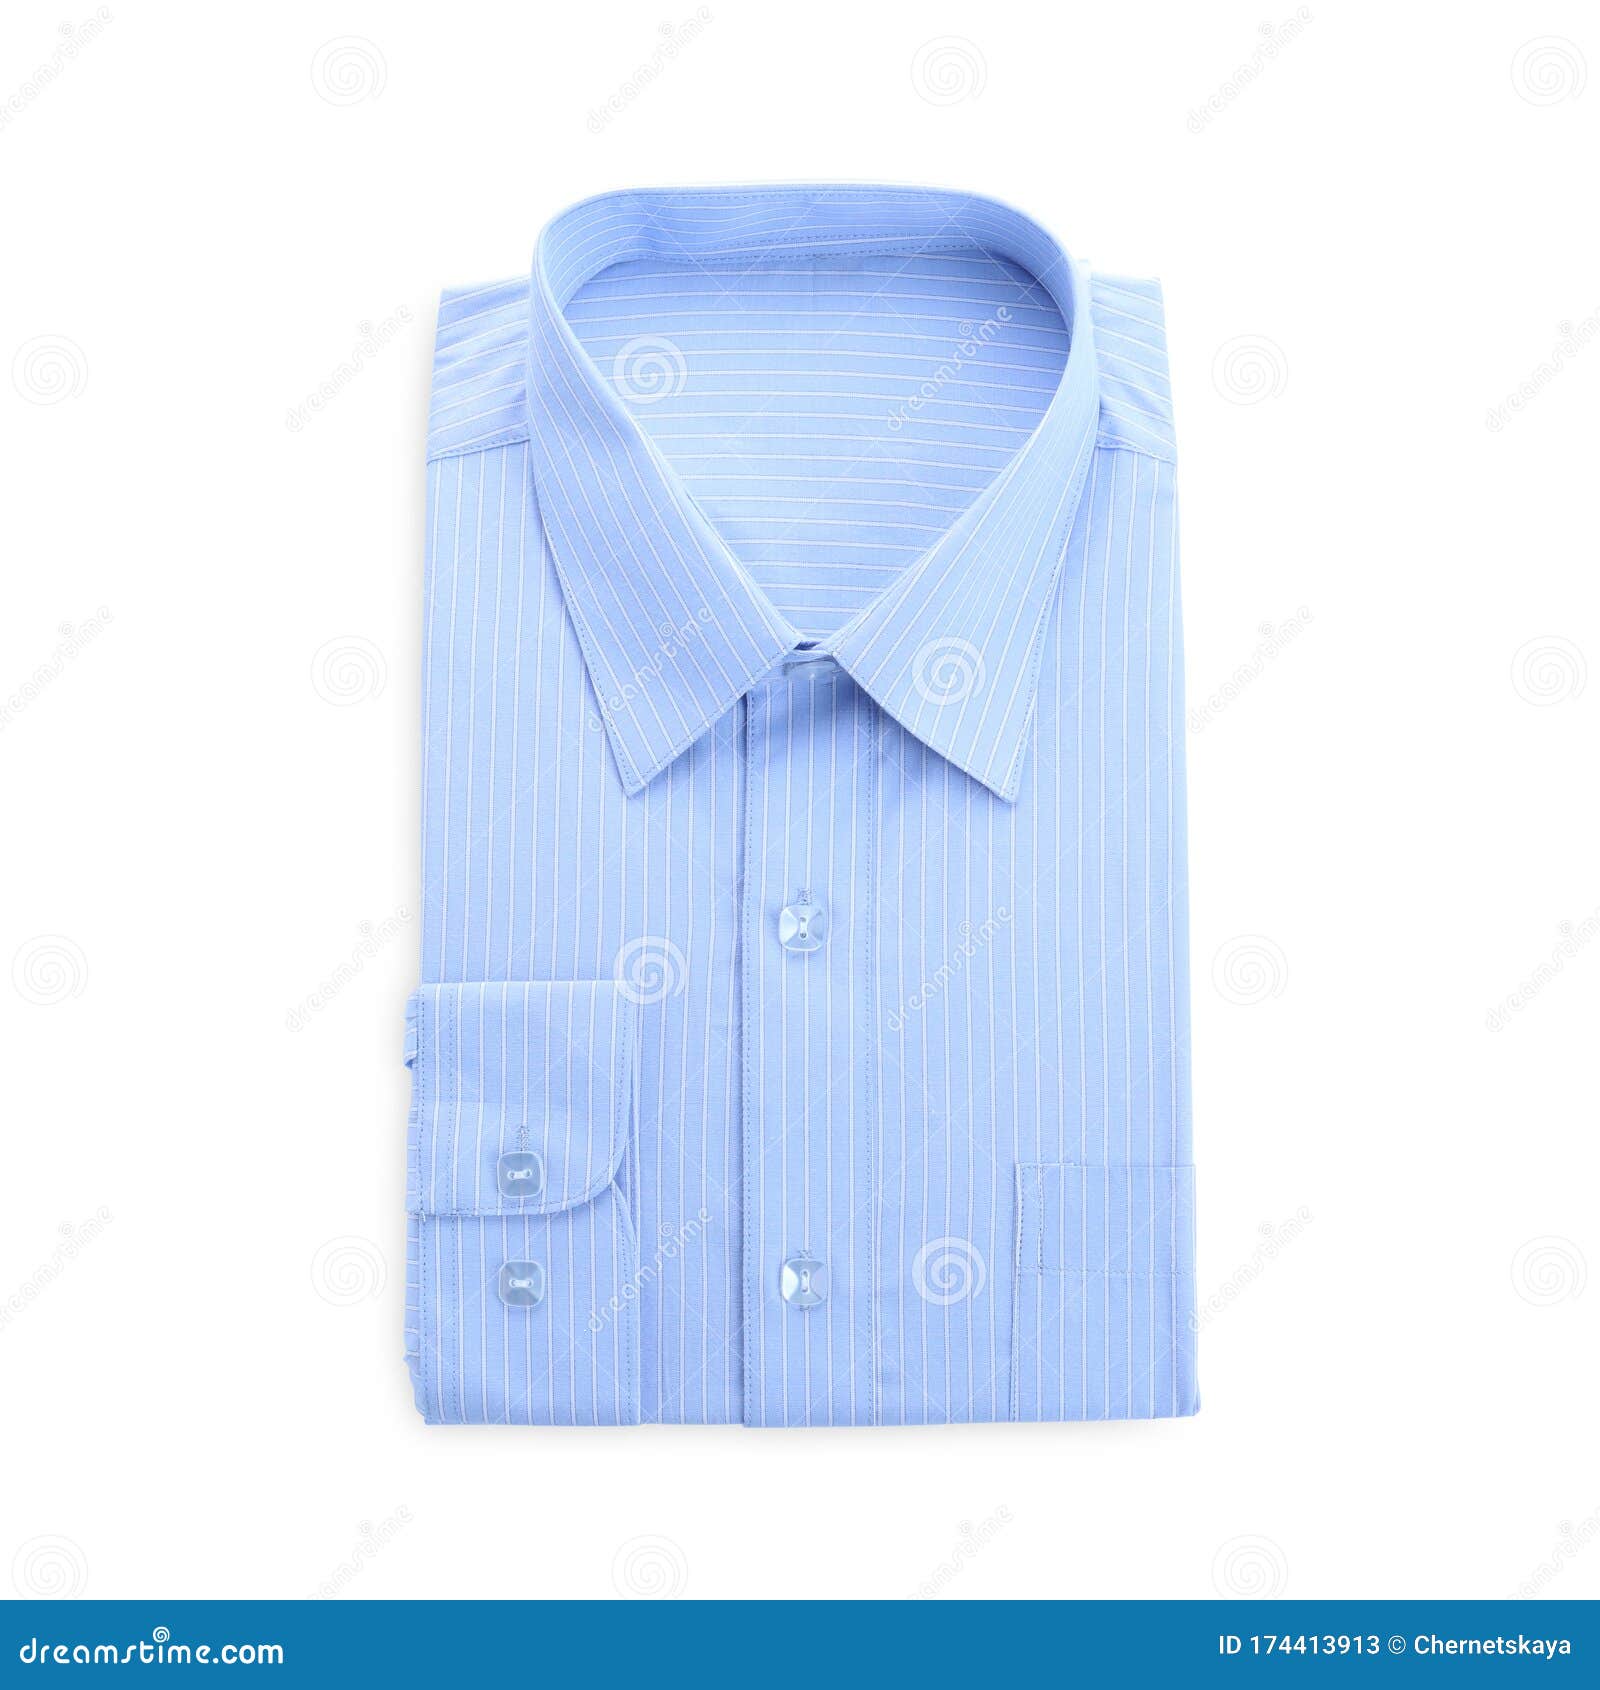 Stylish Light Blue Shirt Isolated on White. Dry-cleaning Service Stock ...